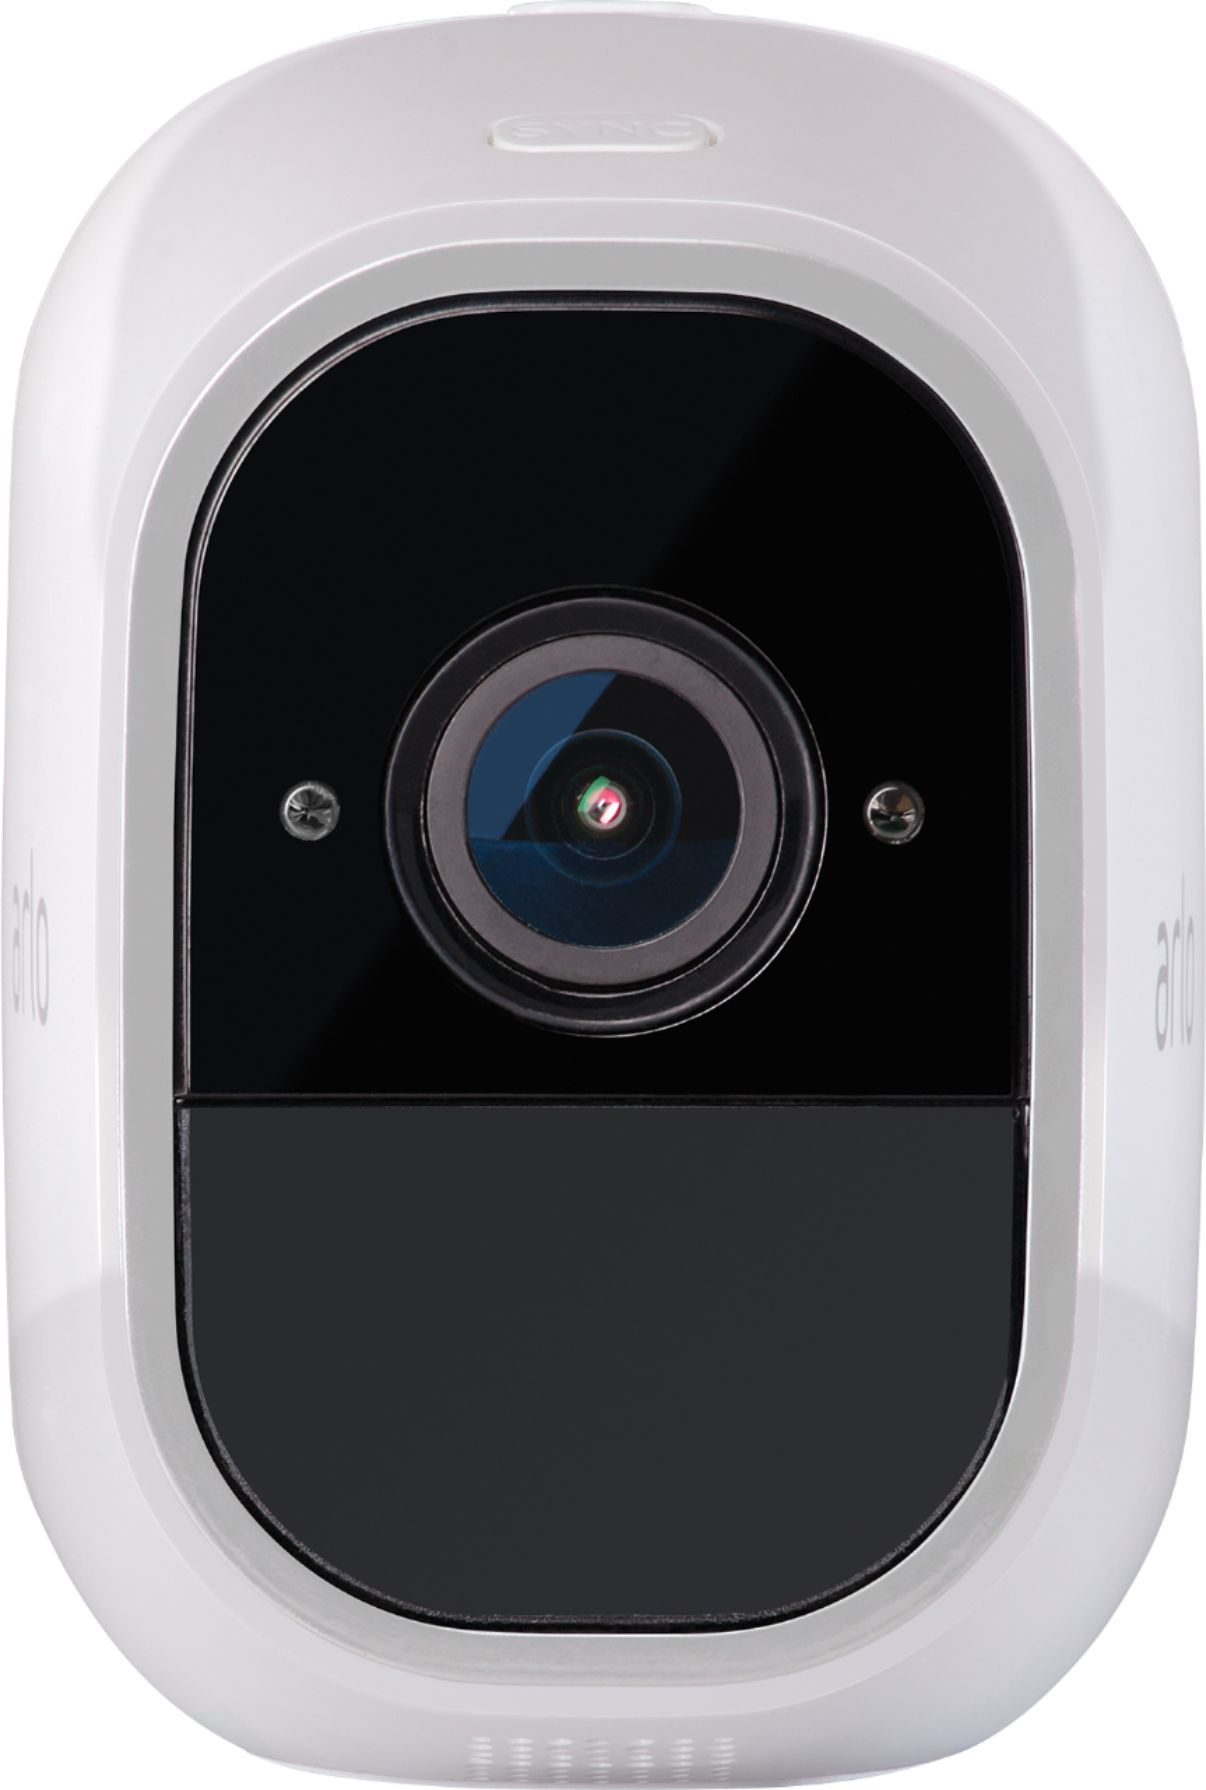 Arlo Pro 2 Indoor/Outdoor Wireless 1080p Security Camera System White VMS4120P100NAS Best Buy